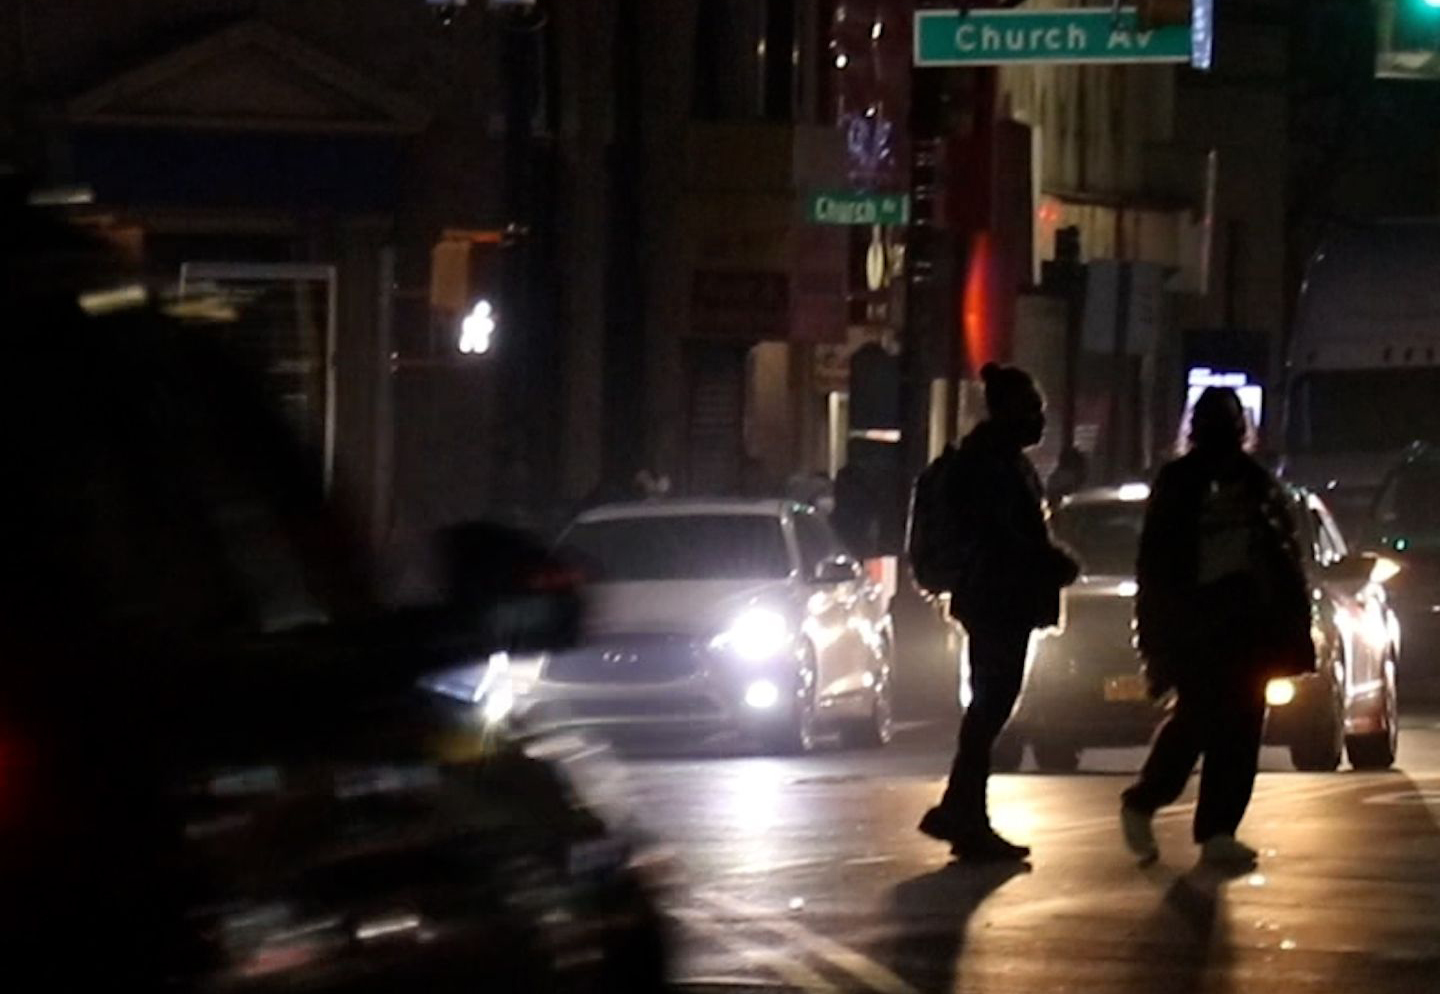 Two pedestrians, crossing an intersection in the dark, silhouetted by the headlights of cars in the background.